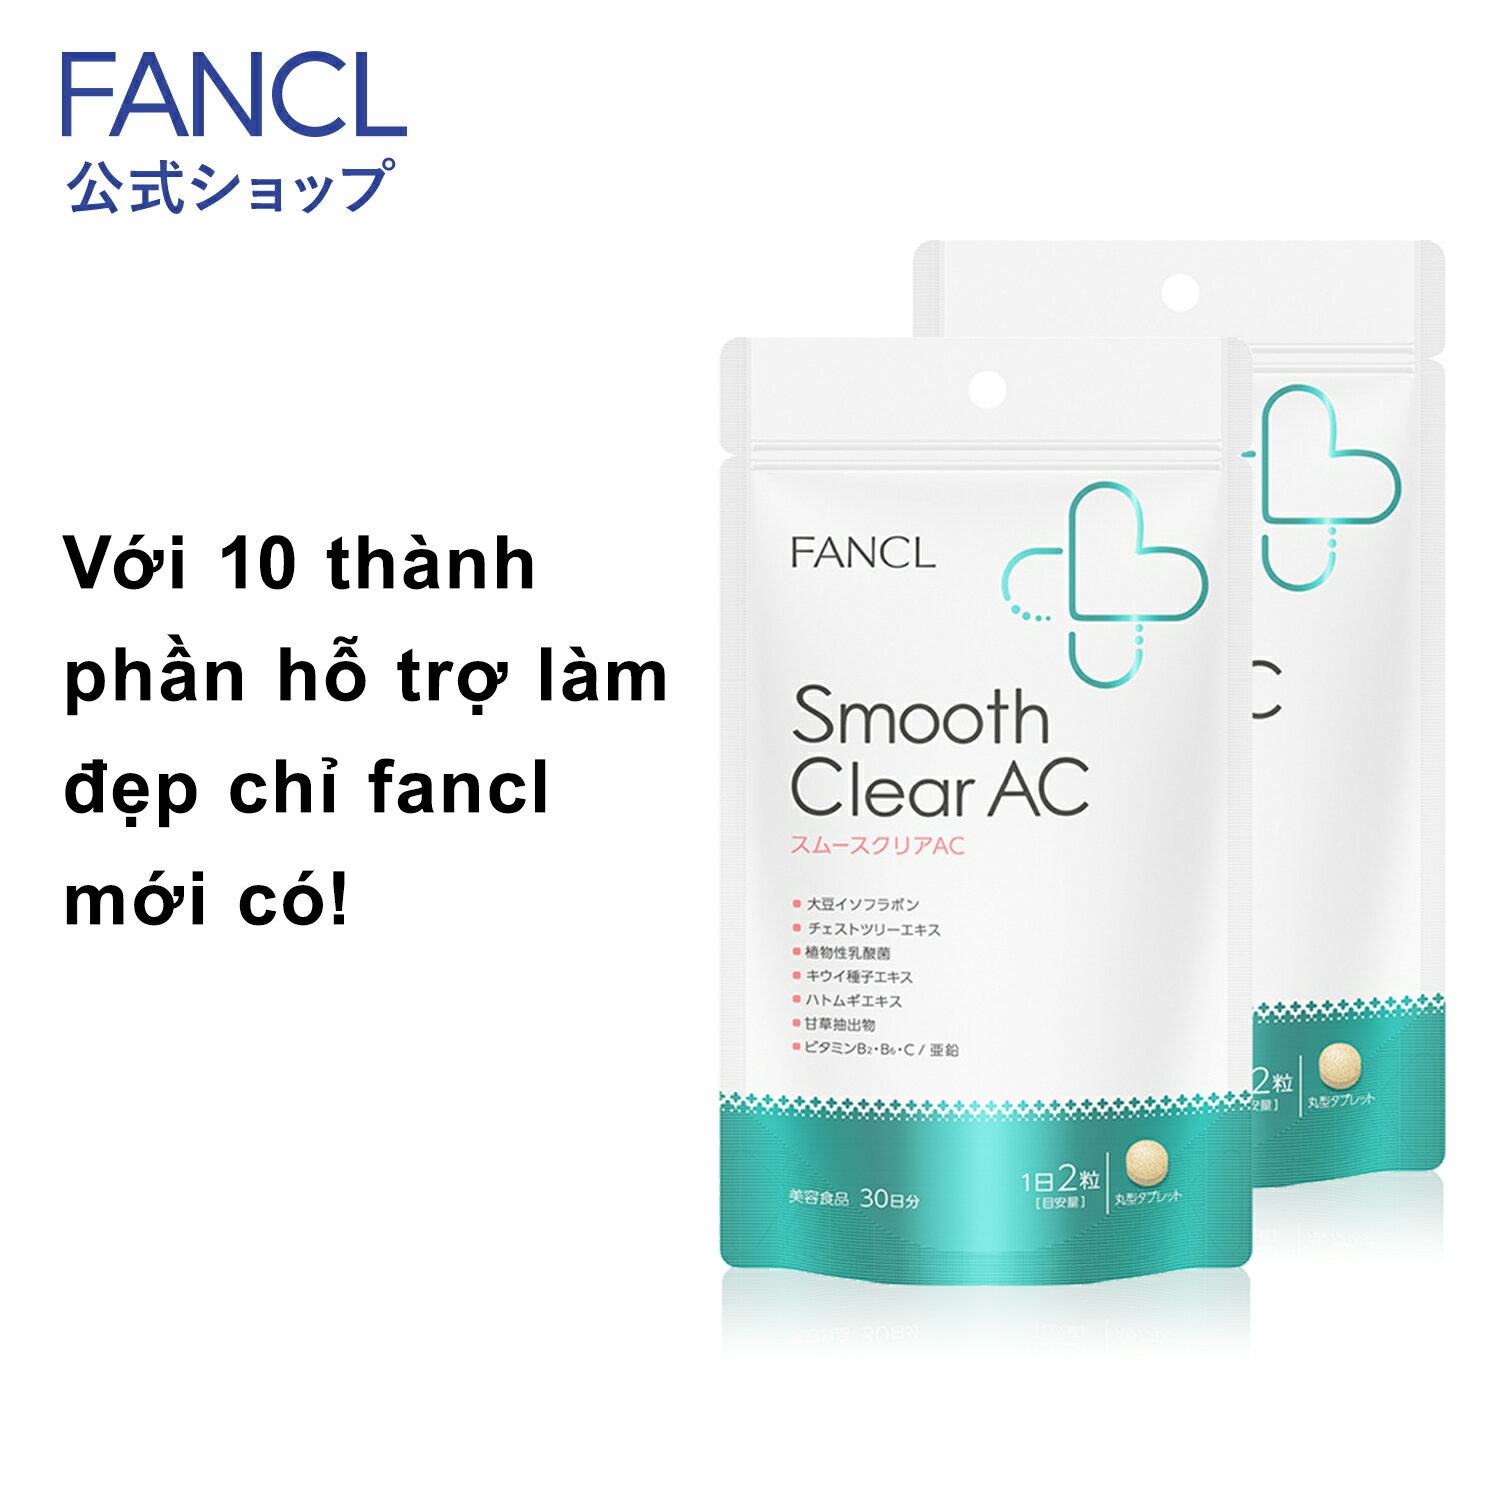 Smooth Clear AC 60days 【FANCL offical】Vietnamese page ファンケル スムースクリアAC 60日分 [supplement soy isoflavone aglycon vitamin vitamin c vitamin d zinc lactic acid bacterium Hatomugi beauty health smoothclearac] 1